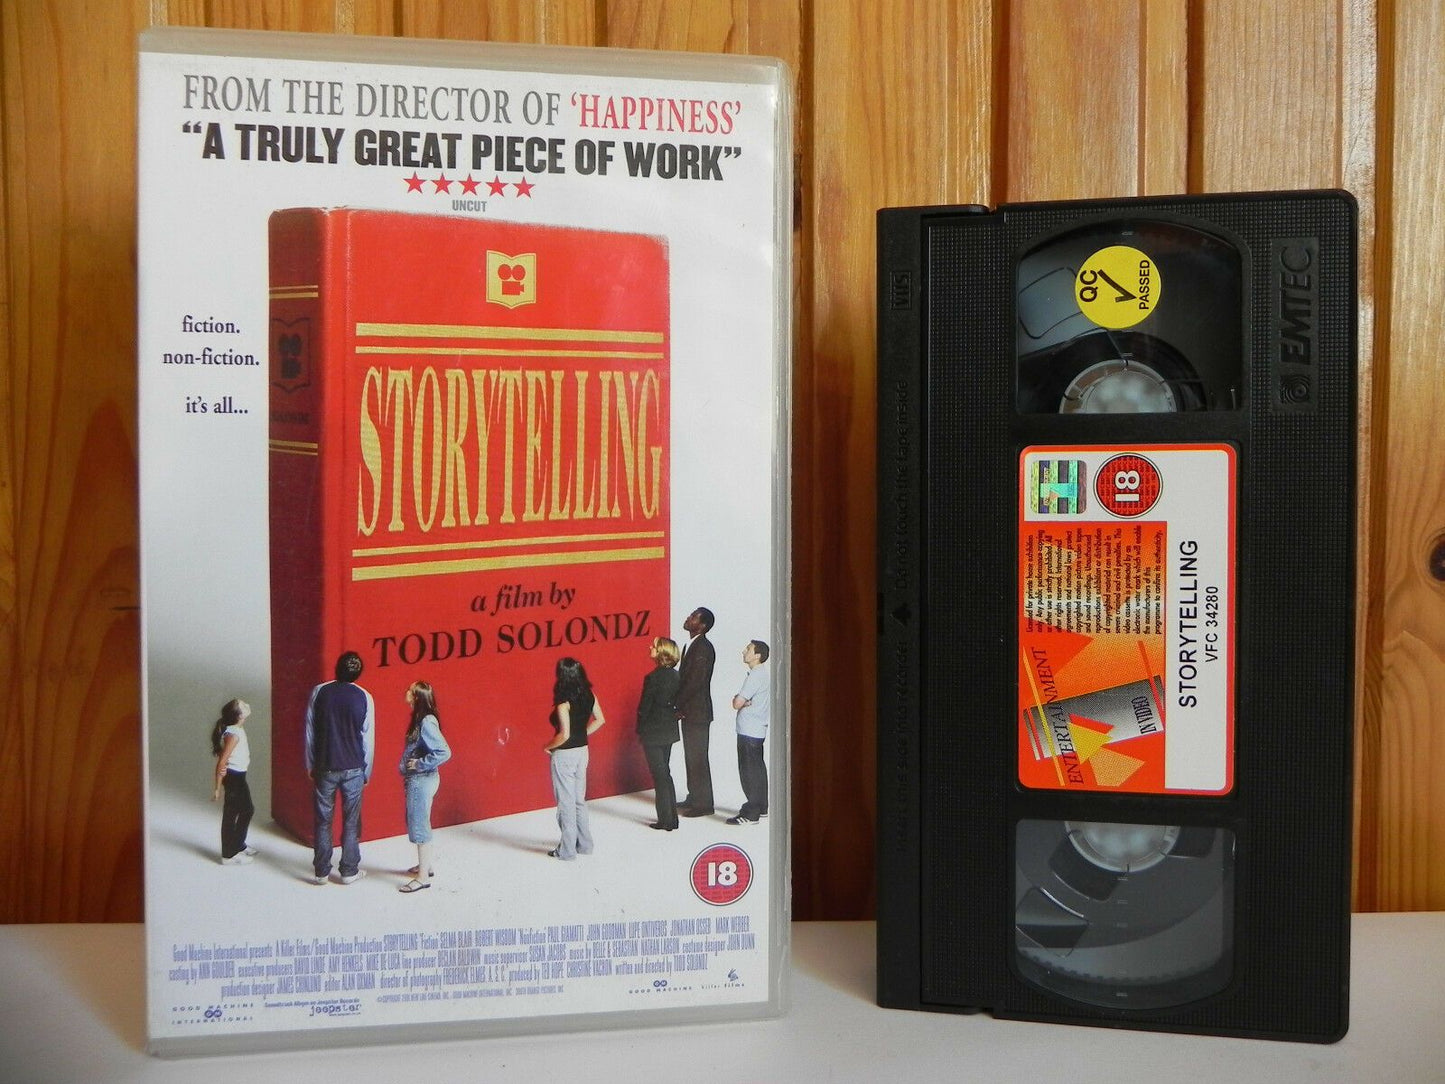 Storytelling - Entertainment In Video - Comedy - Blackly Funny - Large Box - VHS-